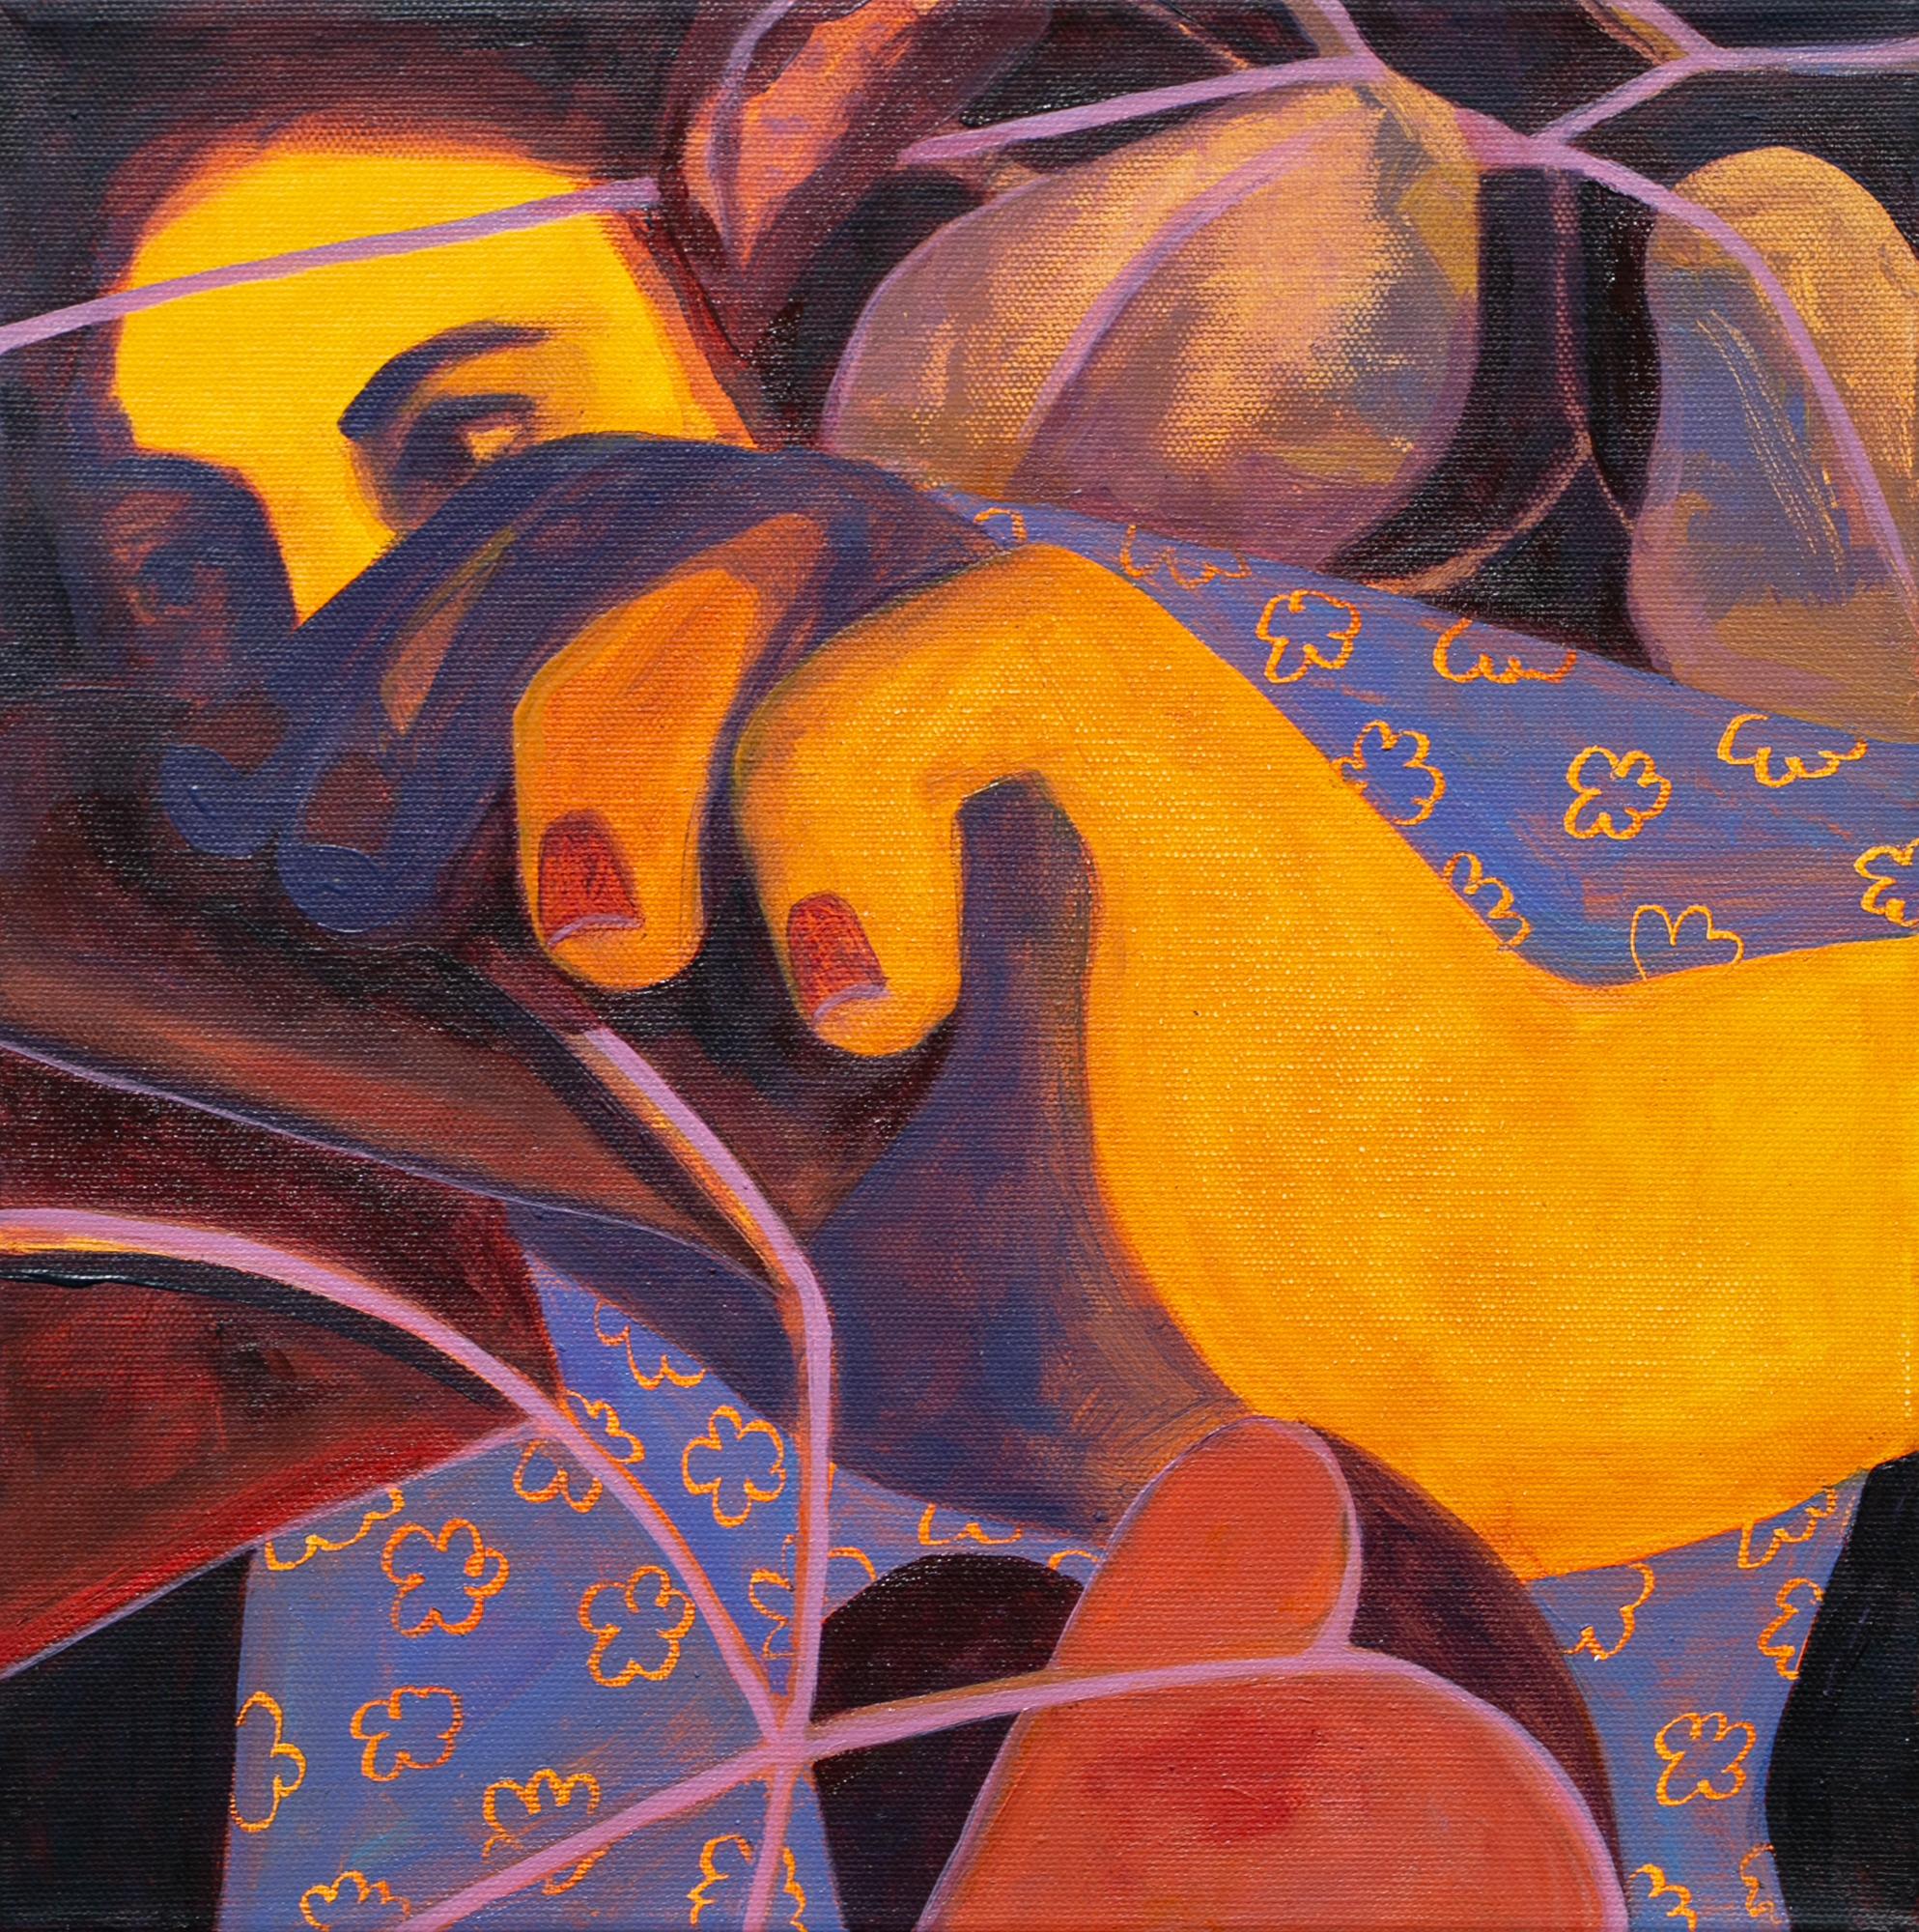 Genevieve Cohn Figurative Painting - "A Tender Thief", Acrylic Painting, Warm Tones, Figurative, Bright Colors